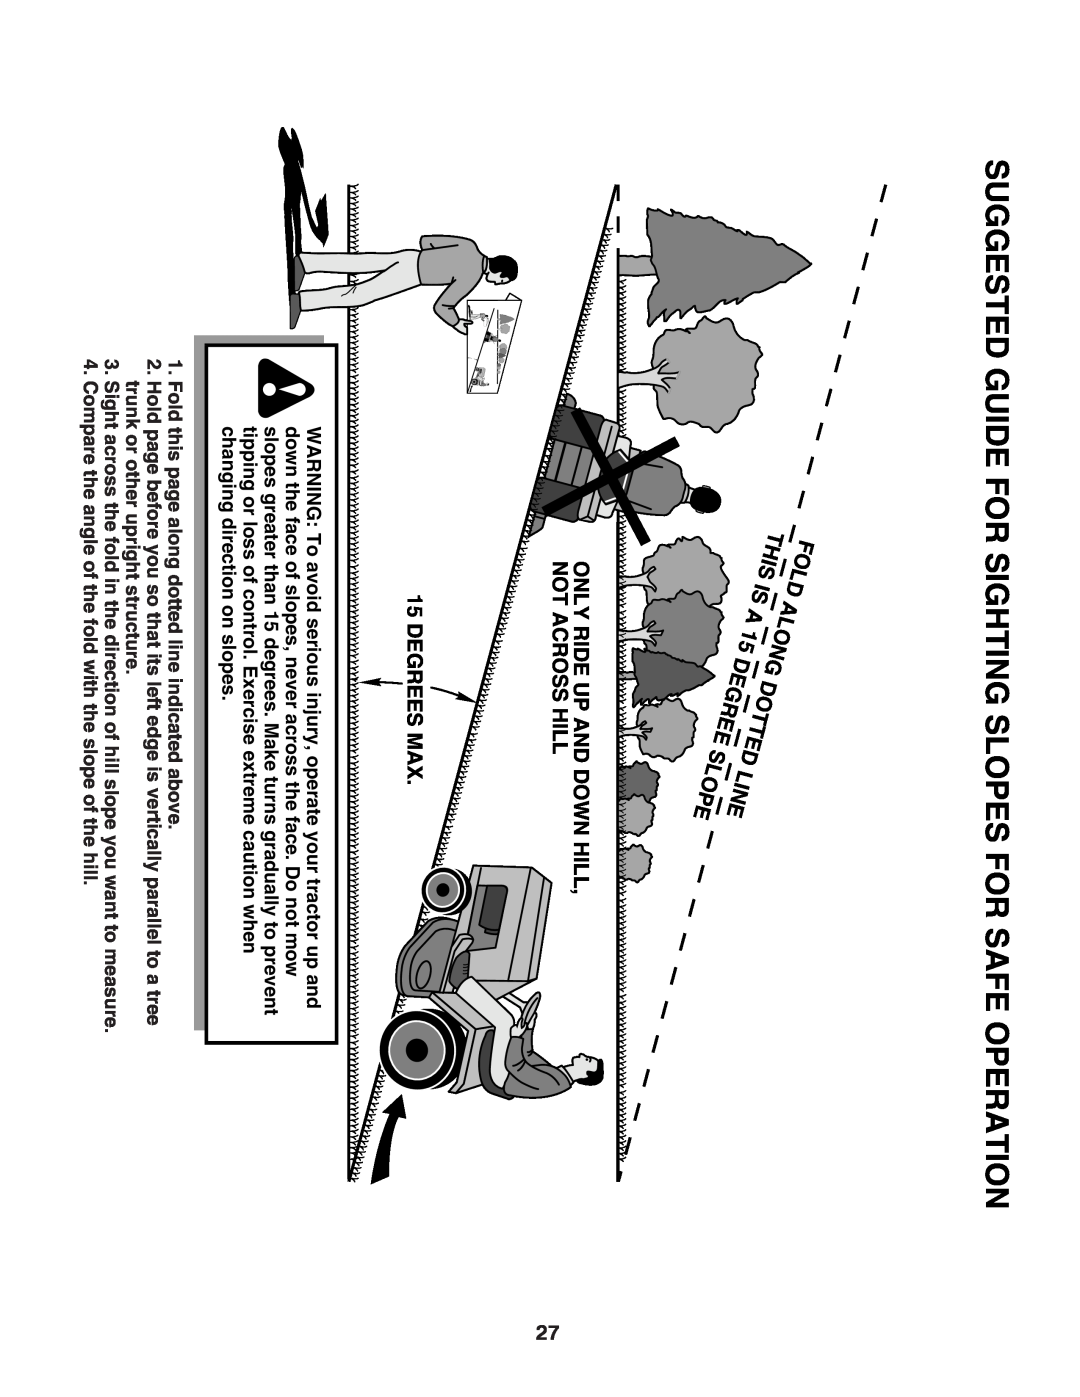 Husqvarna TS300-E3 manual Suggested Guide For Sighting Slopes For Safe Operation 